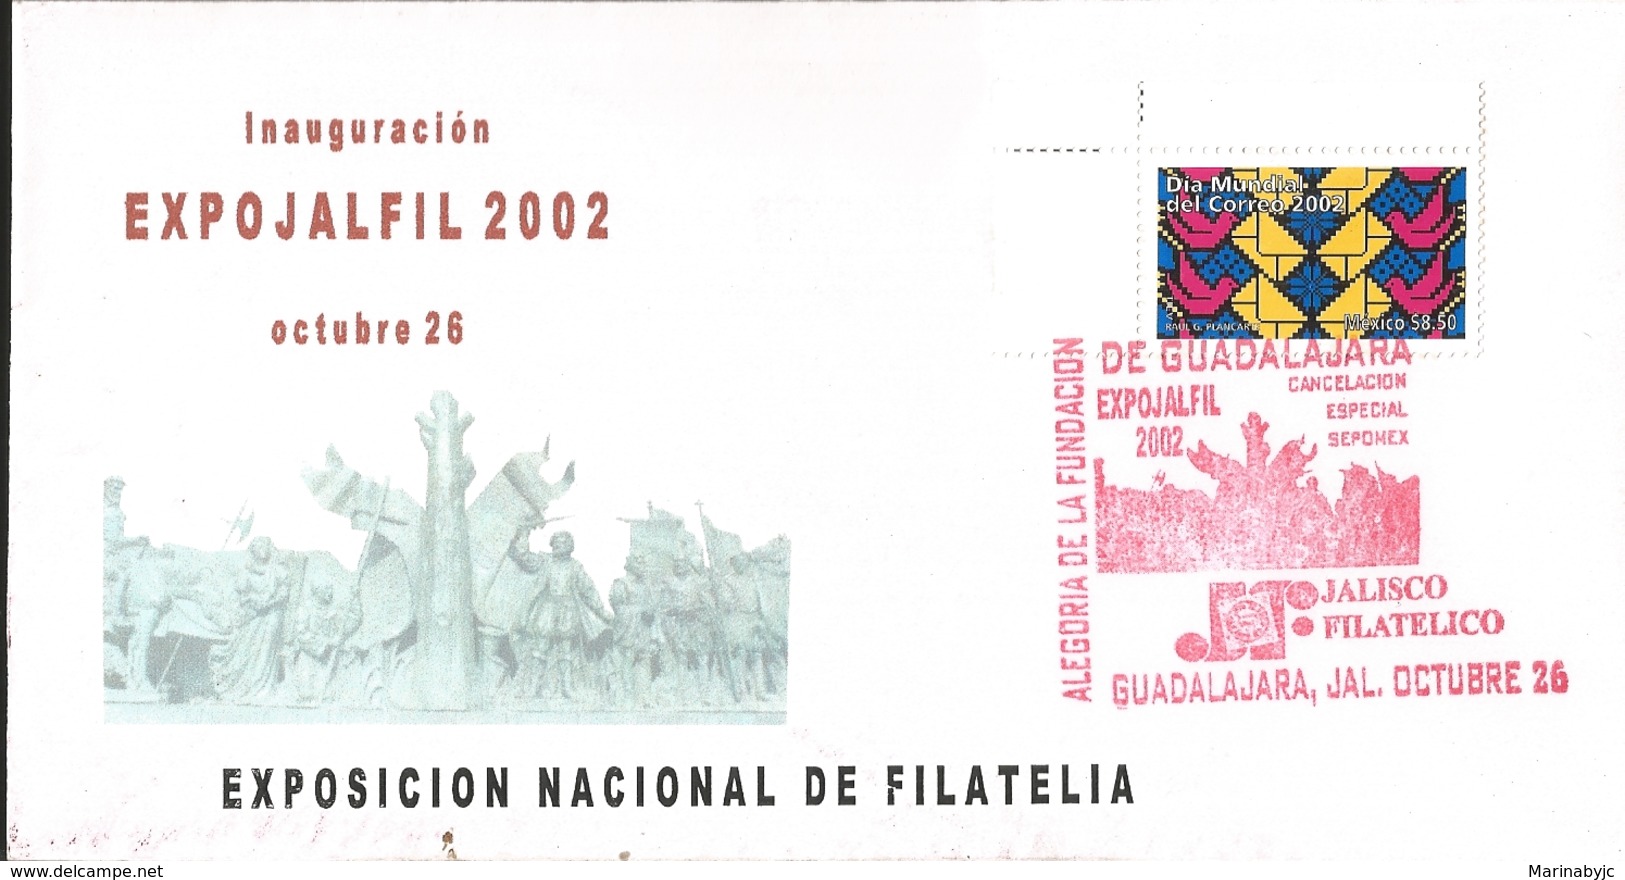 J) 2002 MEXICO, INAUGURATION EXPOJALFIL, NATIONAL PHILATELY EXHIBITION, SPECIAL CANCELLATION, FDC - Mexiko